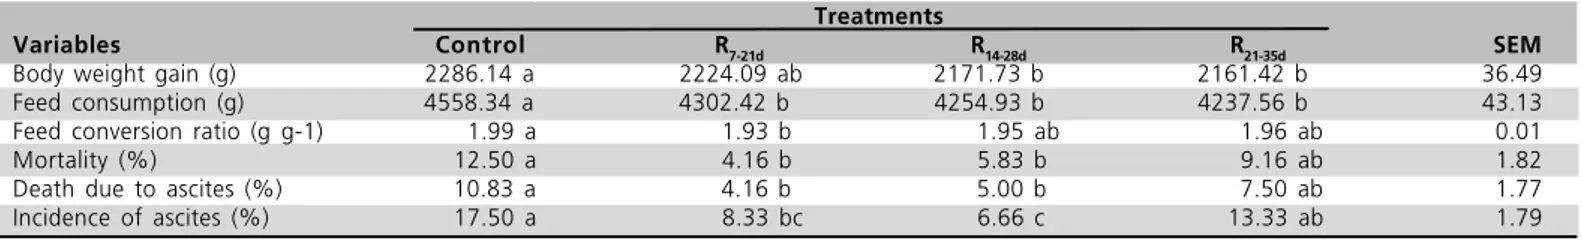 Table 2  - The main effects of treatments on performance and mortality of broiler chickens at 42d.